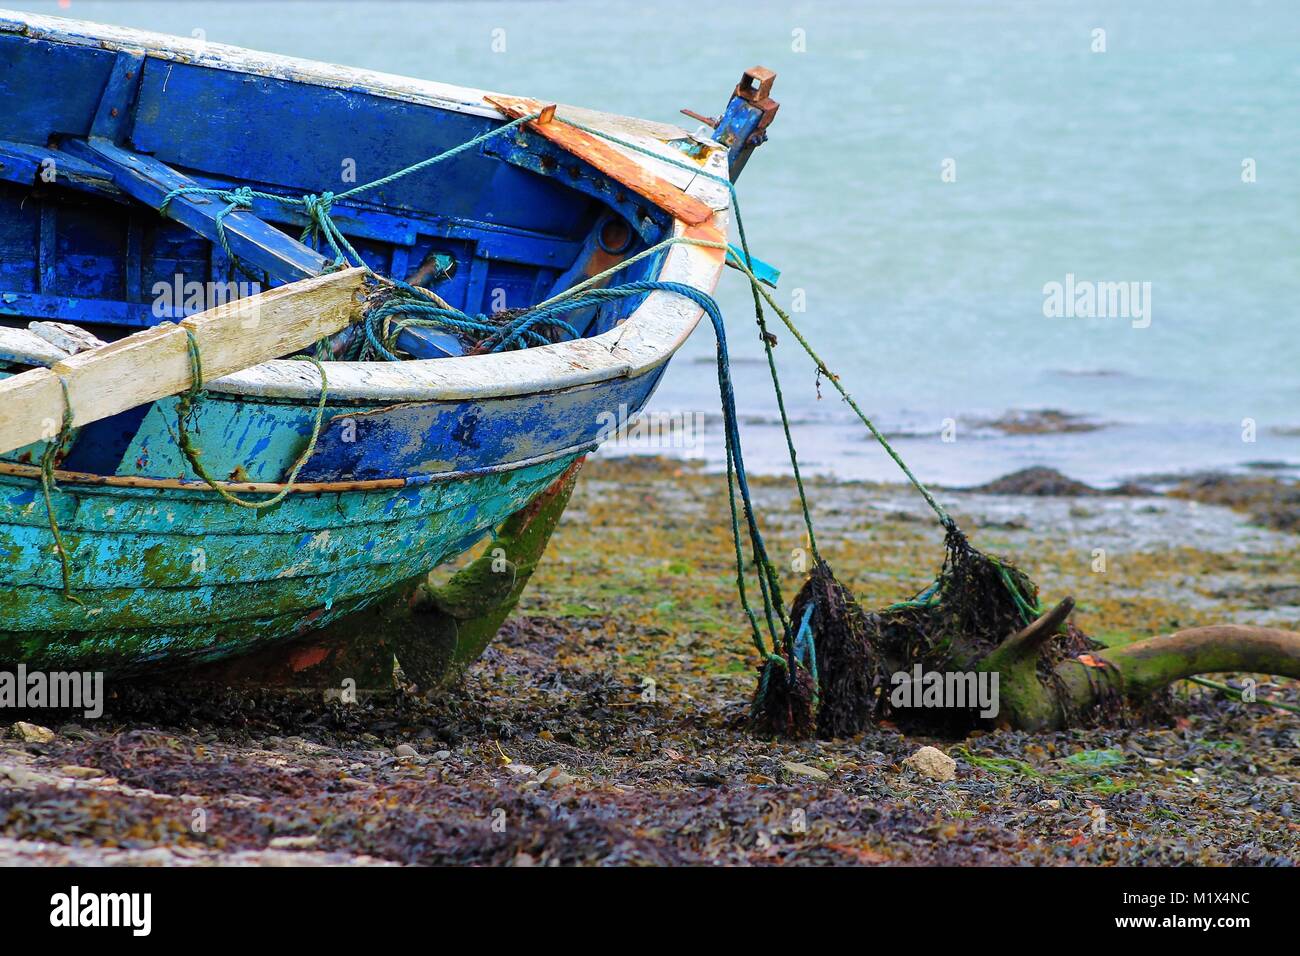 Ship Wrecked wooden boat abandoned and tied up on a shingle beach Stock Photo